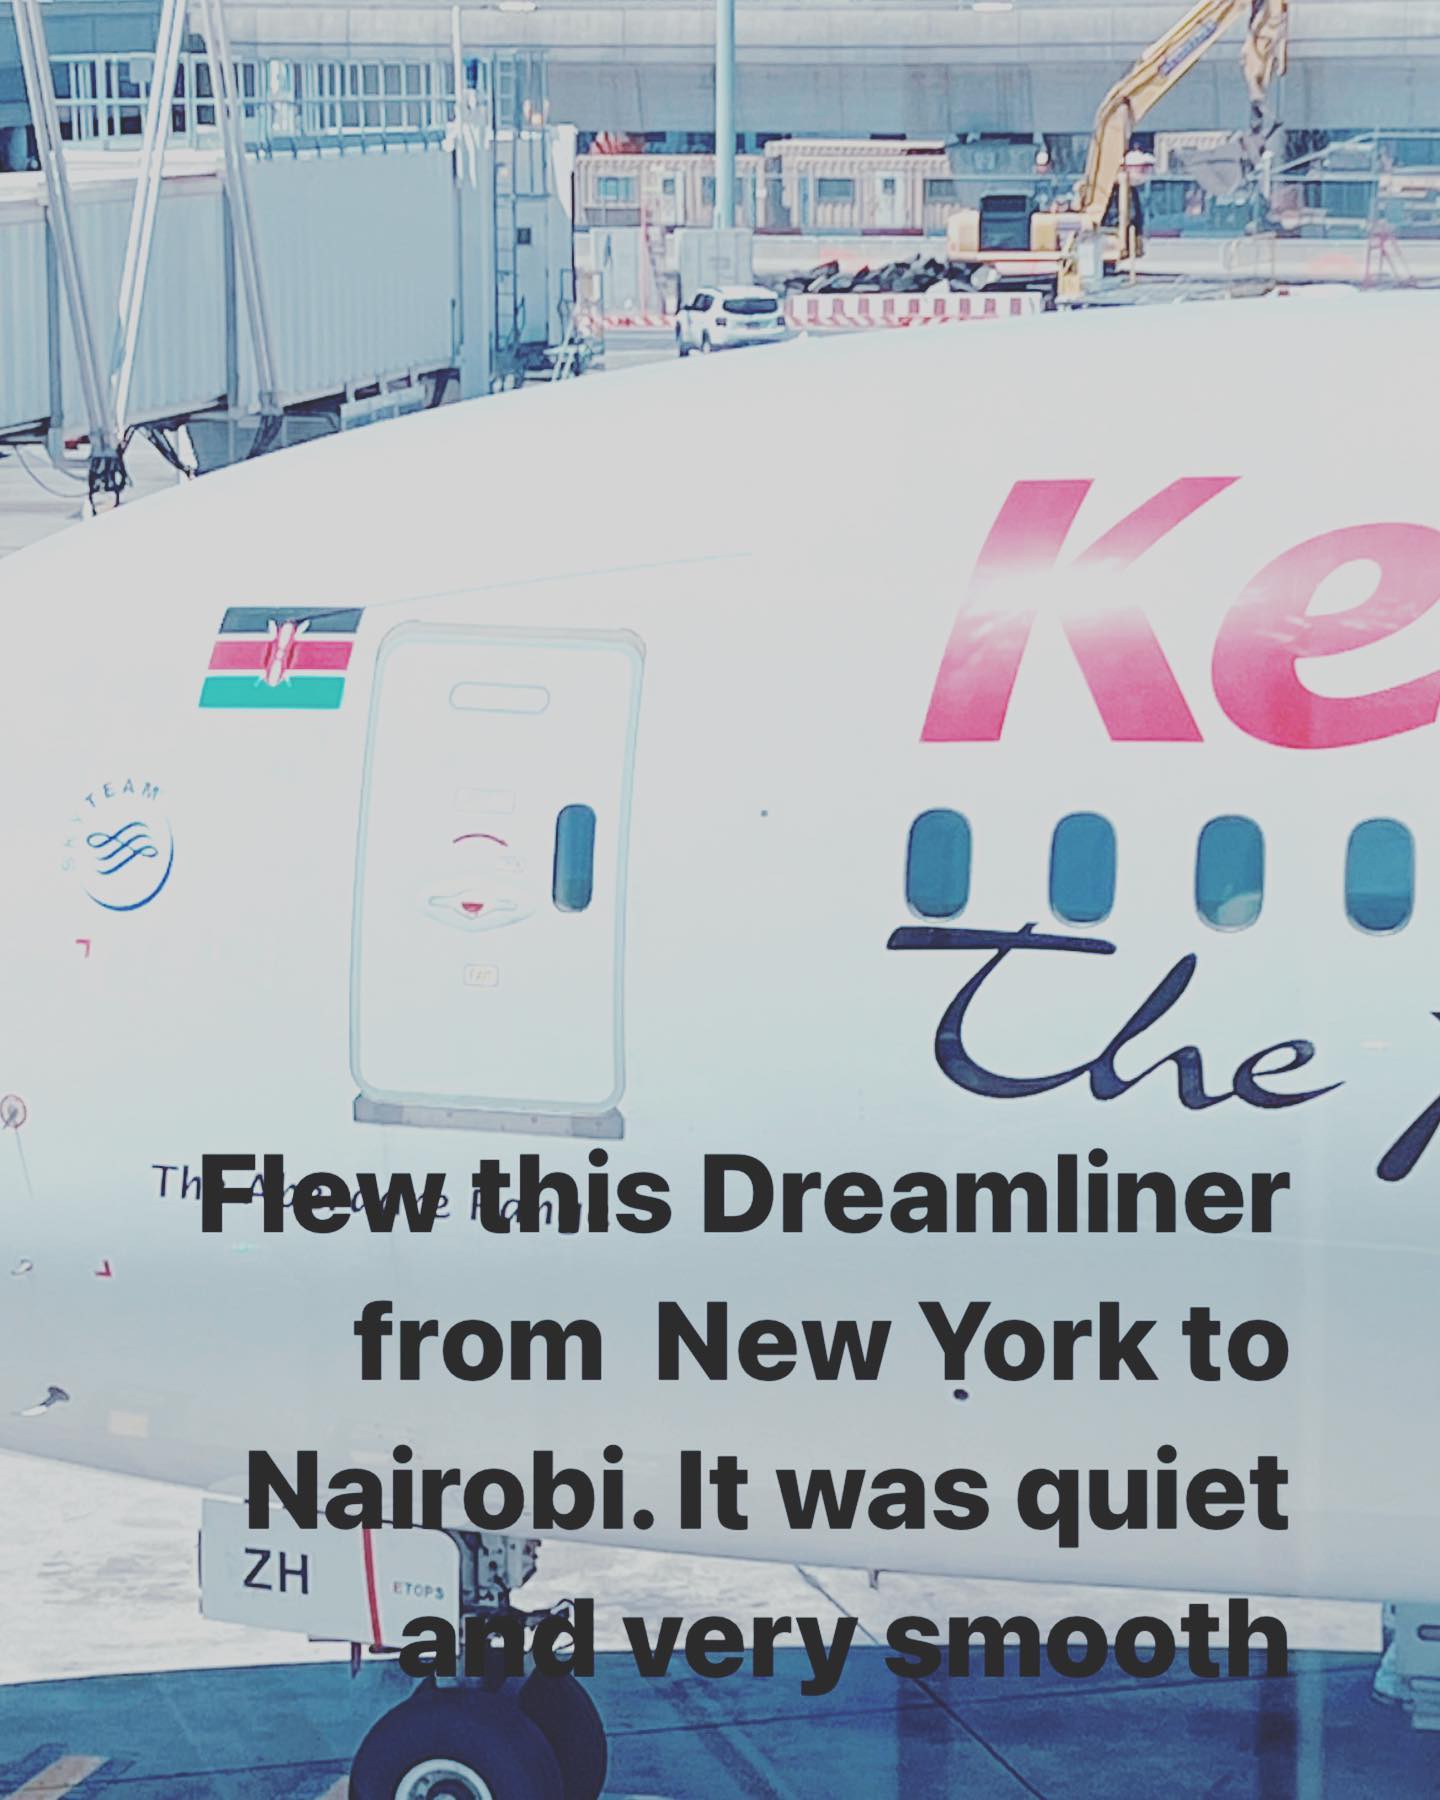 Flew from New York to Nairobi on the #dreamliner it was so nice and quiet and smooth. #kenyaairways #prideofafrica I was sitting in a very nice seat, and look at all the space ( I know my boots need a polish )#upgradeftw  Apple juice before take off. I loved all the KQ details. Everything was so carefully done and so much pride and care. The salmon was good, and tasty ( a rarity in airline food ). #airlinefood Now waiting for next flight to Johannesburg.